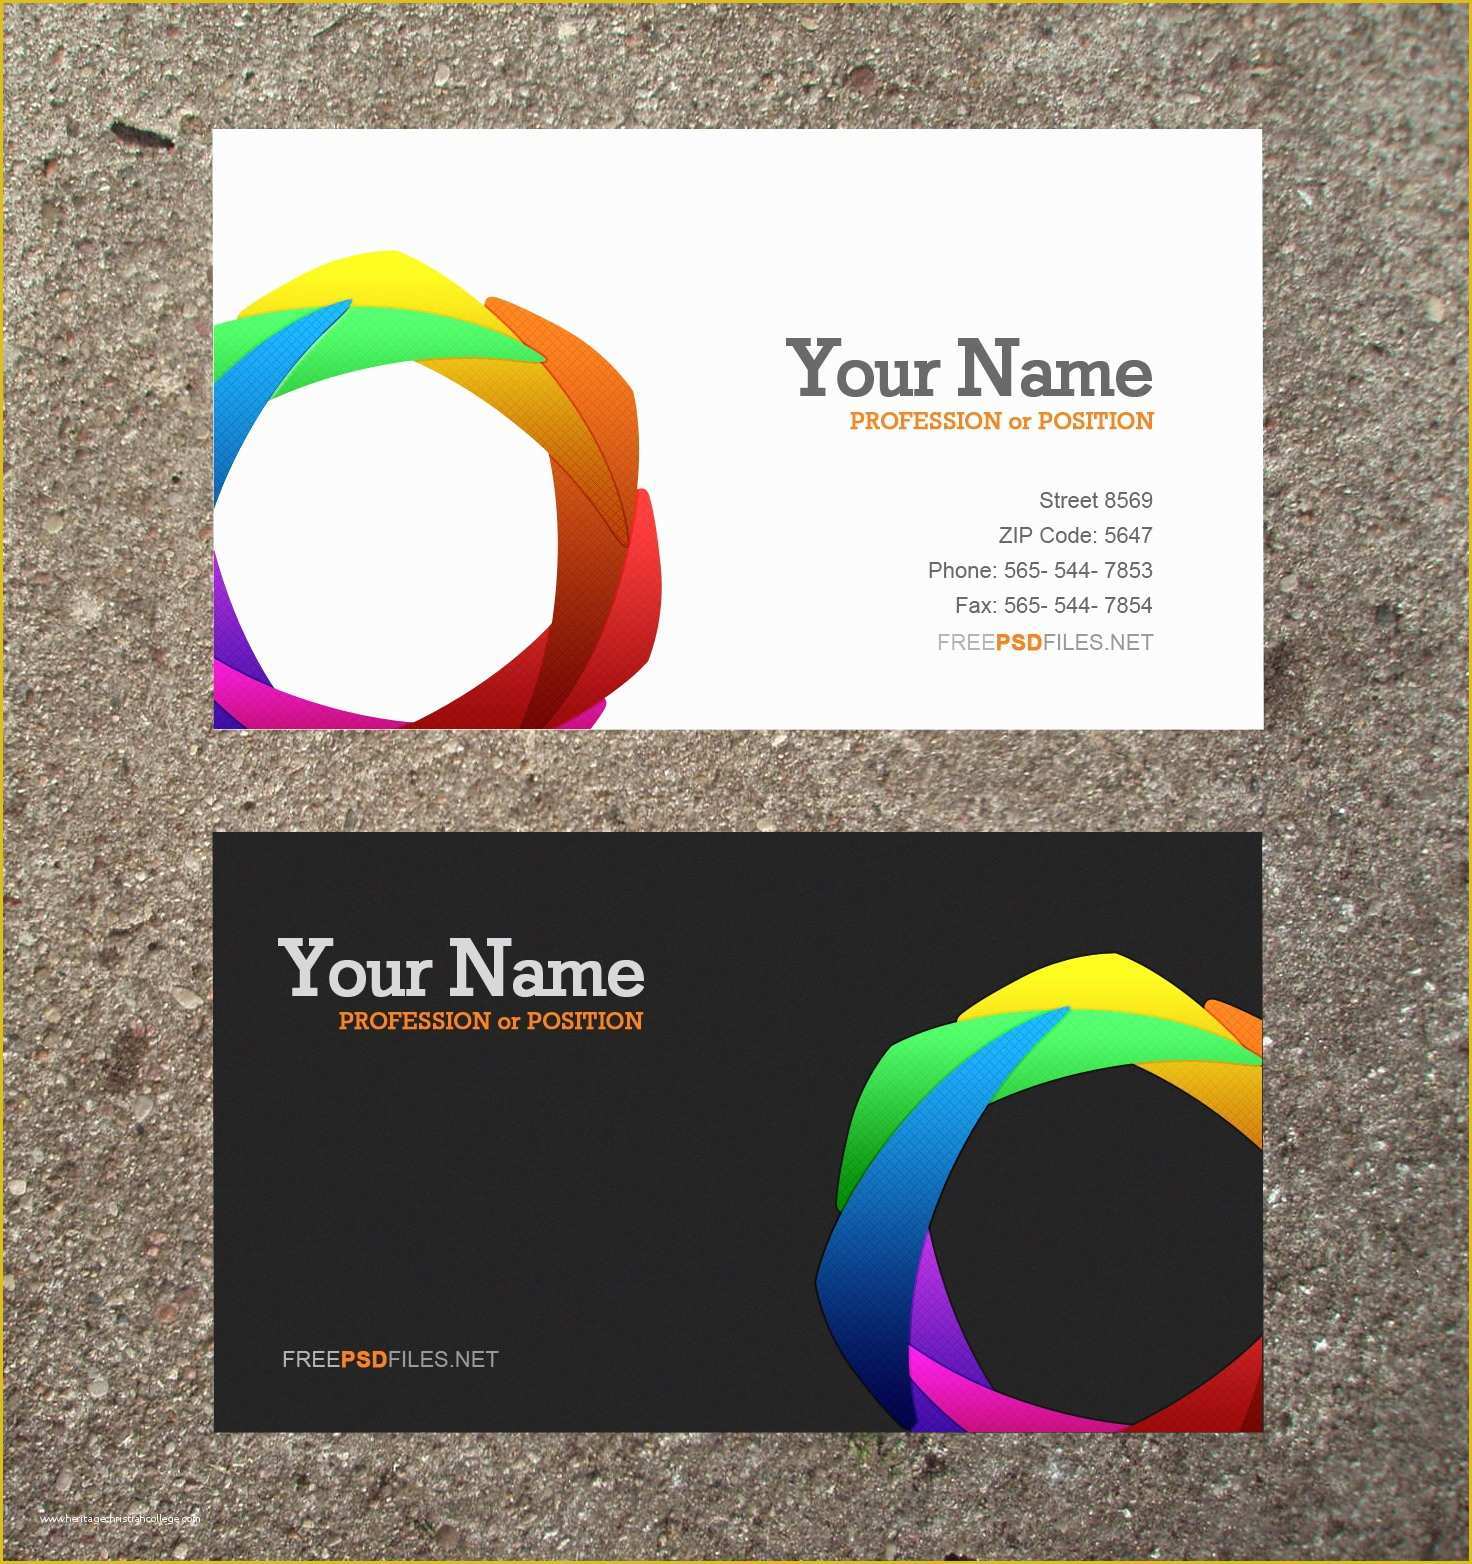 Online Business Card Template Free Download Of 20 Free Psd Business Card Templates Free Business